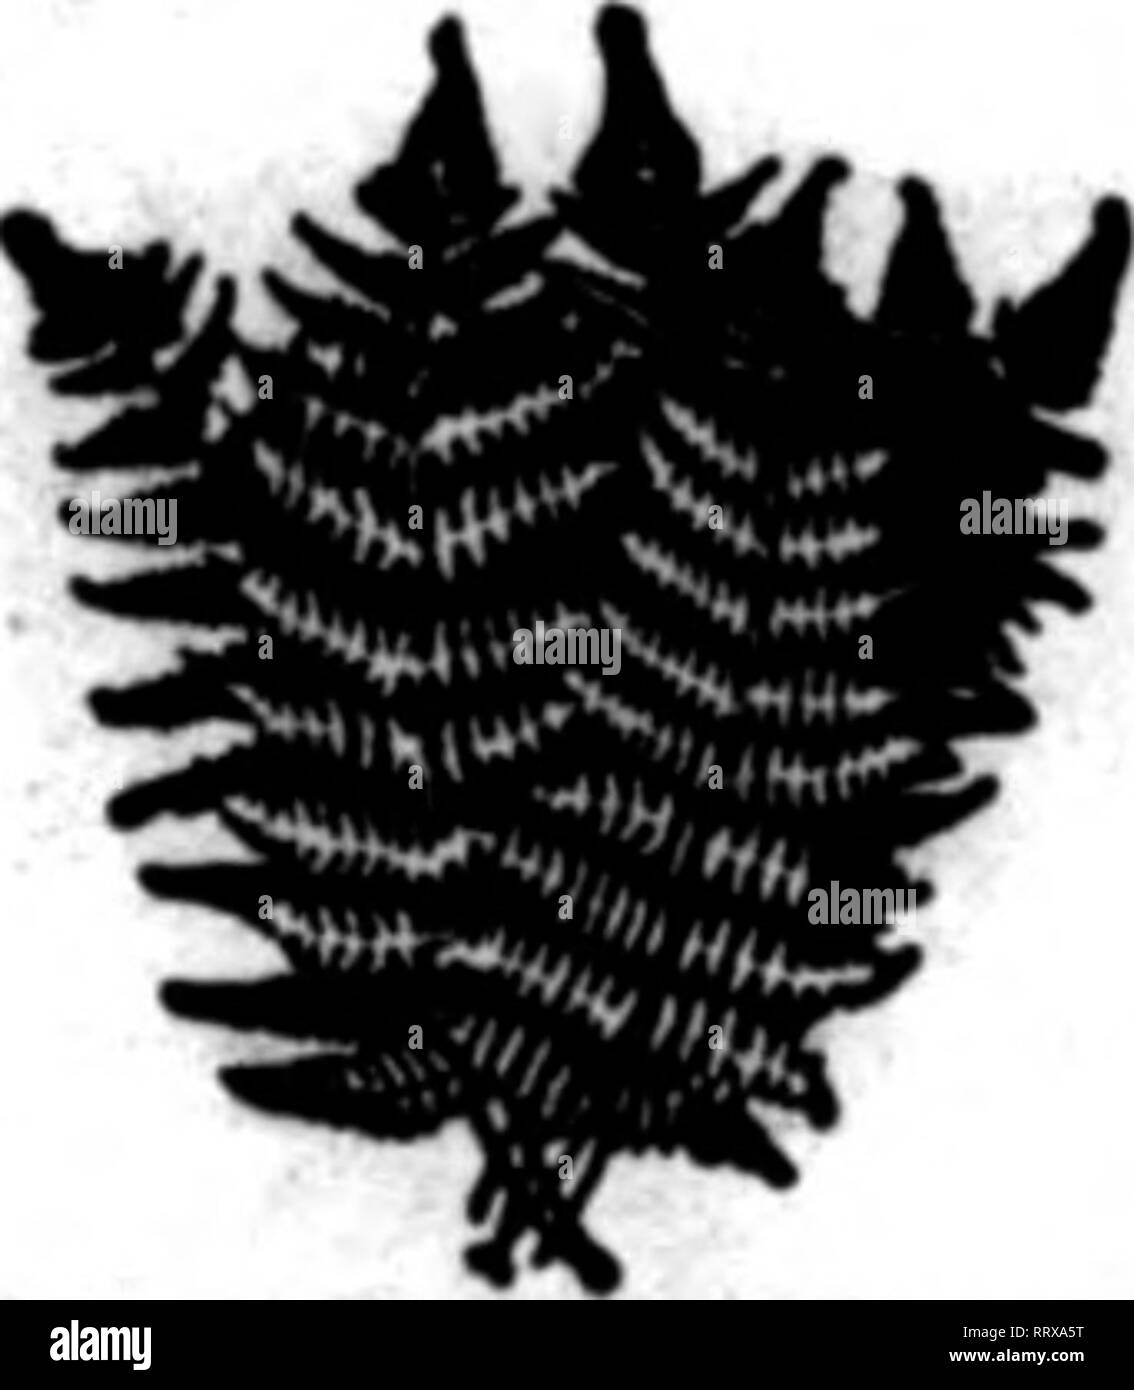 . Florists' review [microform]. Floriculture. NEW CROP NOW READY FERNS AND ORKEN OALAX AND LEUCOTHOK. DsKger and Fancy Ferns. 1000, $1.0U: case of diWO, $1.00 GreenGalax 1000. .50: caaeof lu,()00, 4.00 Brenze Qalax (case lots only)... .$5.00 per case of 10.000 Green Leucothoe (long) $2.00 per 1000 Green Leuoothoe (short) 1.00 per 1000 Wben in a hurry, wire lu at Elk Park, N. C. THE NORTH CAROLINA EVERGREEN CO. BANNERS ELK, N. C.. Meatlon The Berlew when yoa write. I A. A. GIBBONS, Red Uvel, Ala. | i K^r.: Wild Smilax I ij IMy, MisMetM, Fiscy sari Daner Ferat, Needle ^ J Piact, Nataral aad Perp Stock Photo